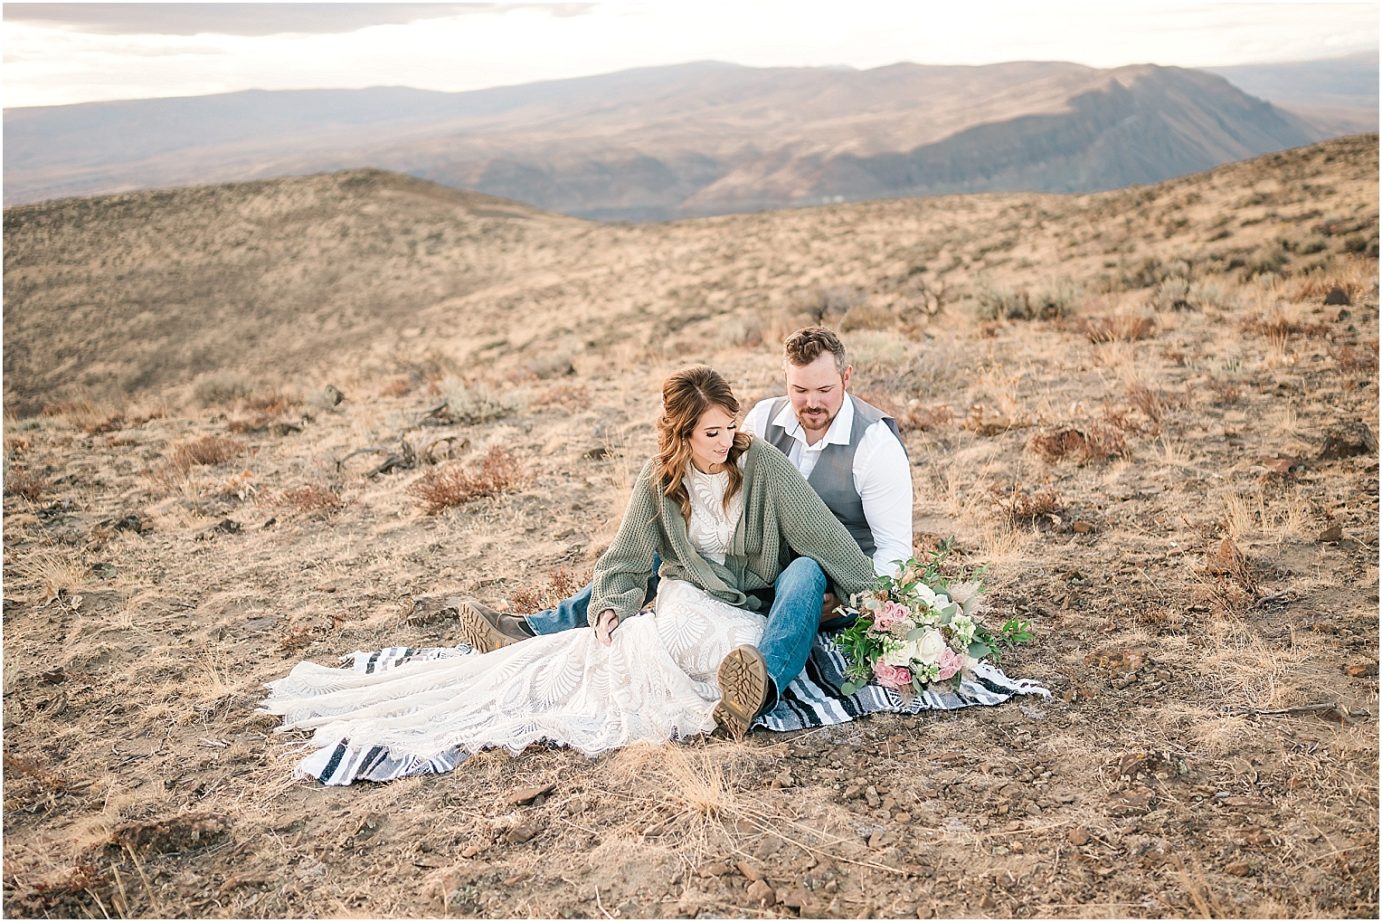 Eastern Washington Elopement Photographer Mike and Carley boho bride on mountain top